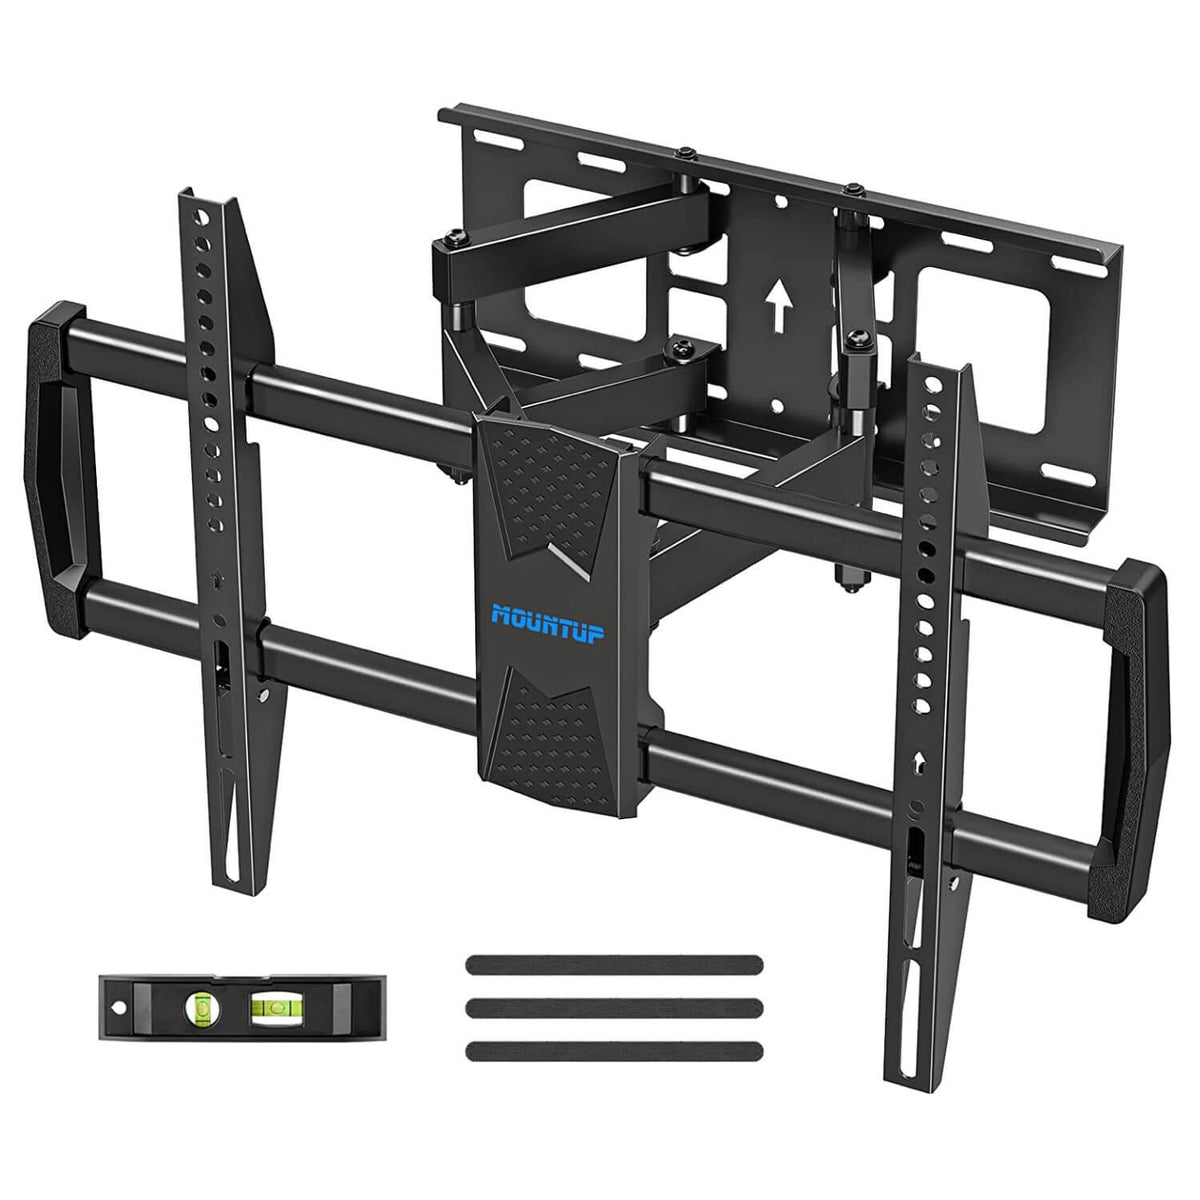 Full Motion TV Wall Mount for 42-75 inch TVs - MOUNTUP